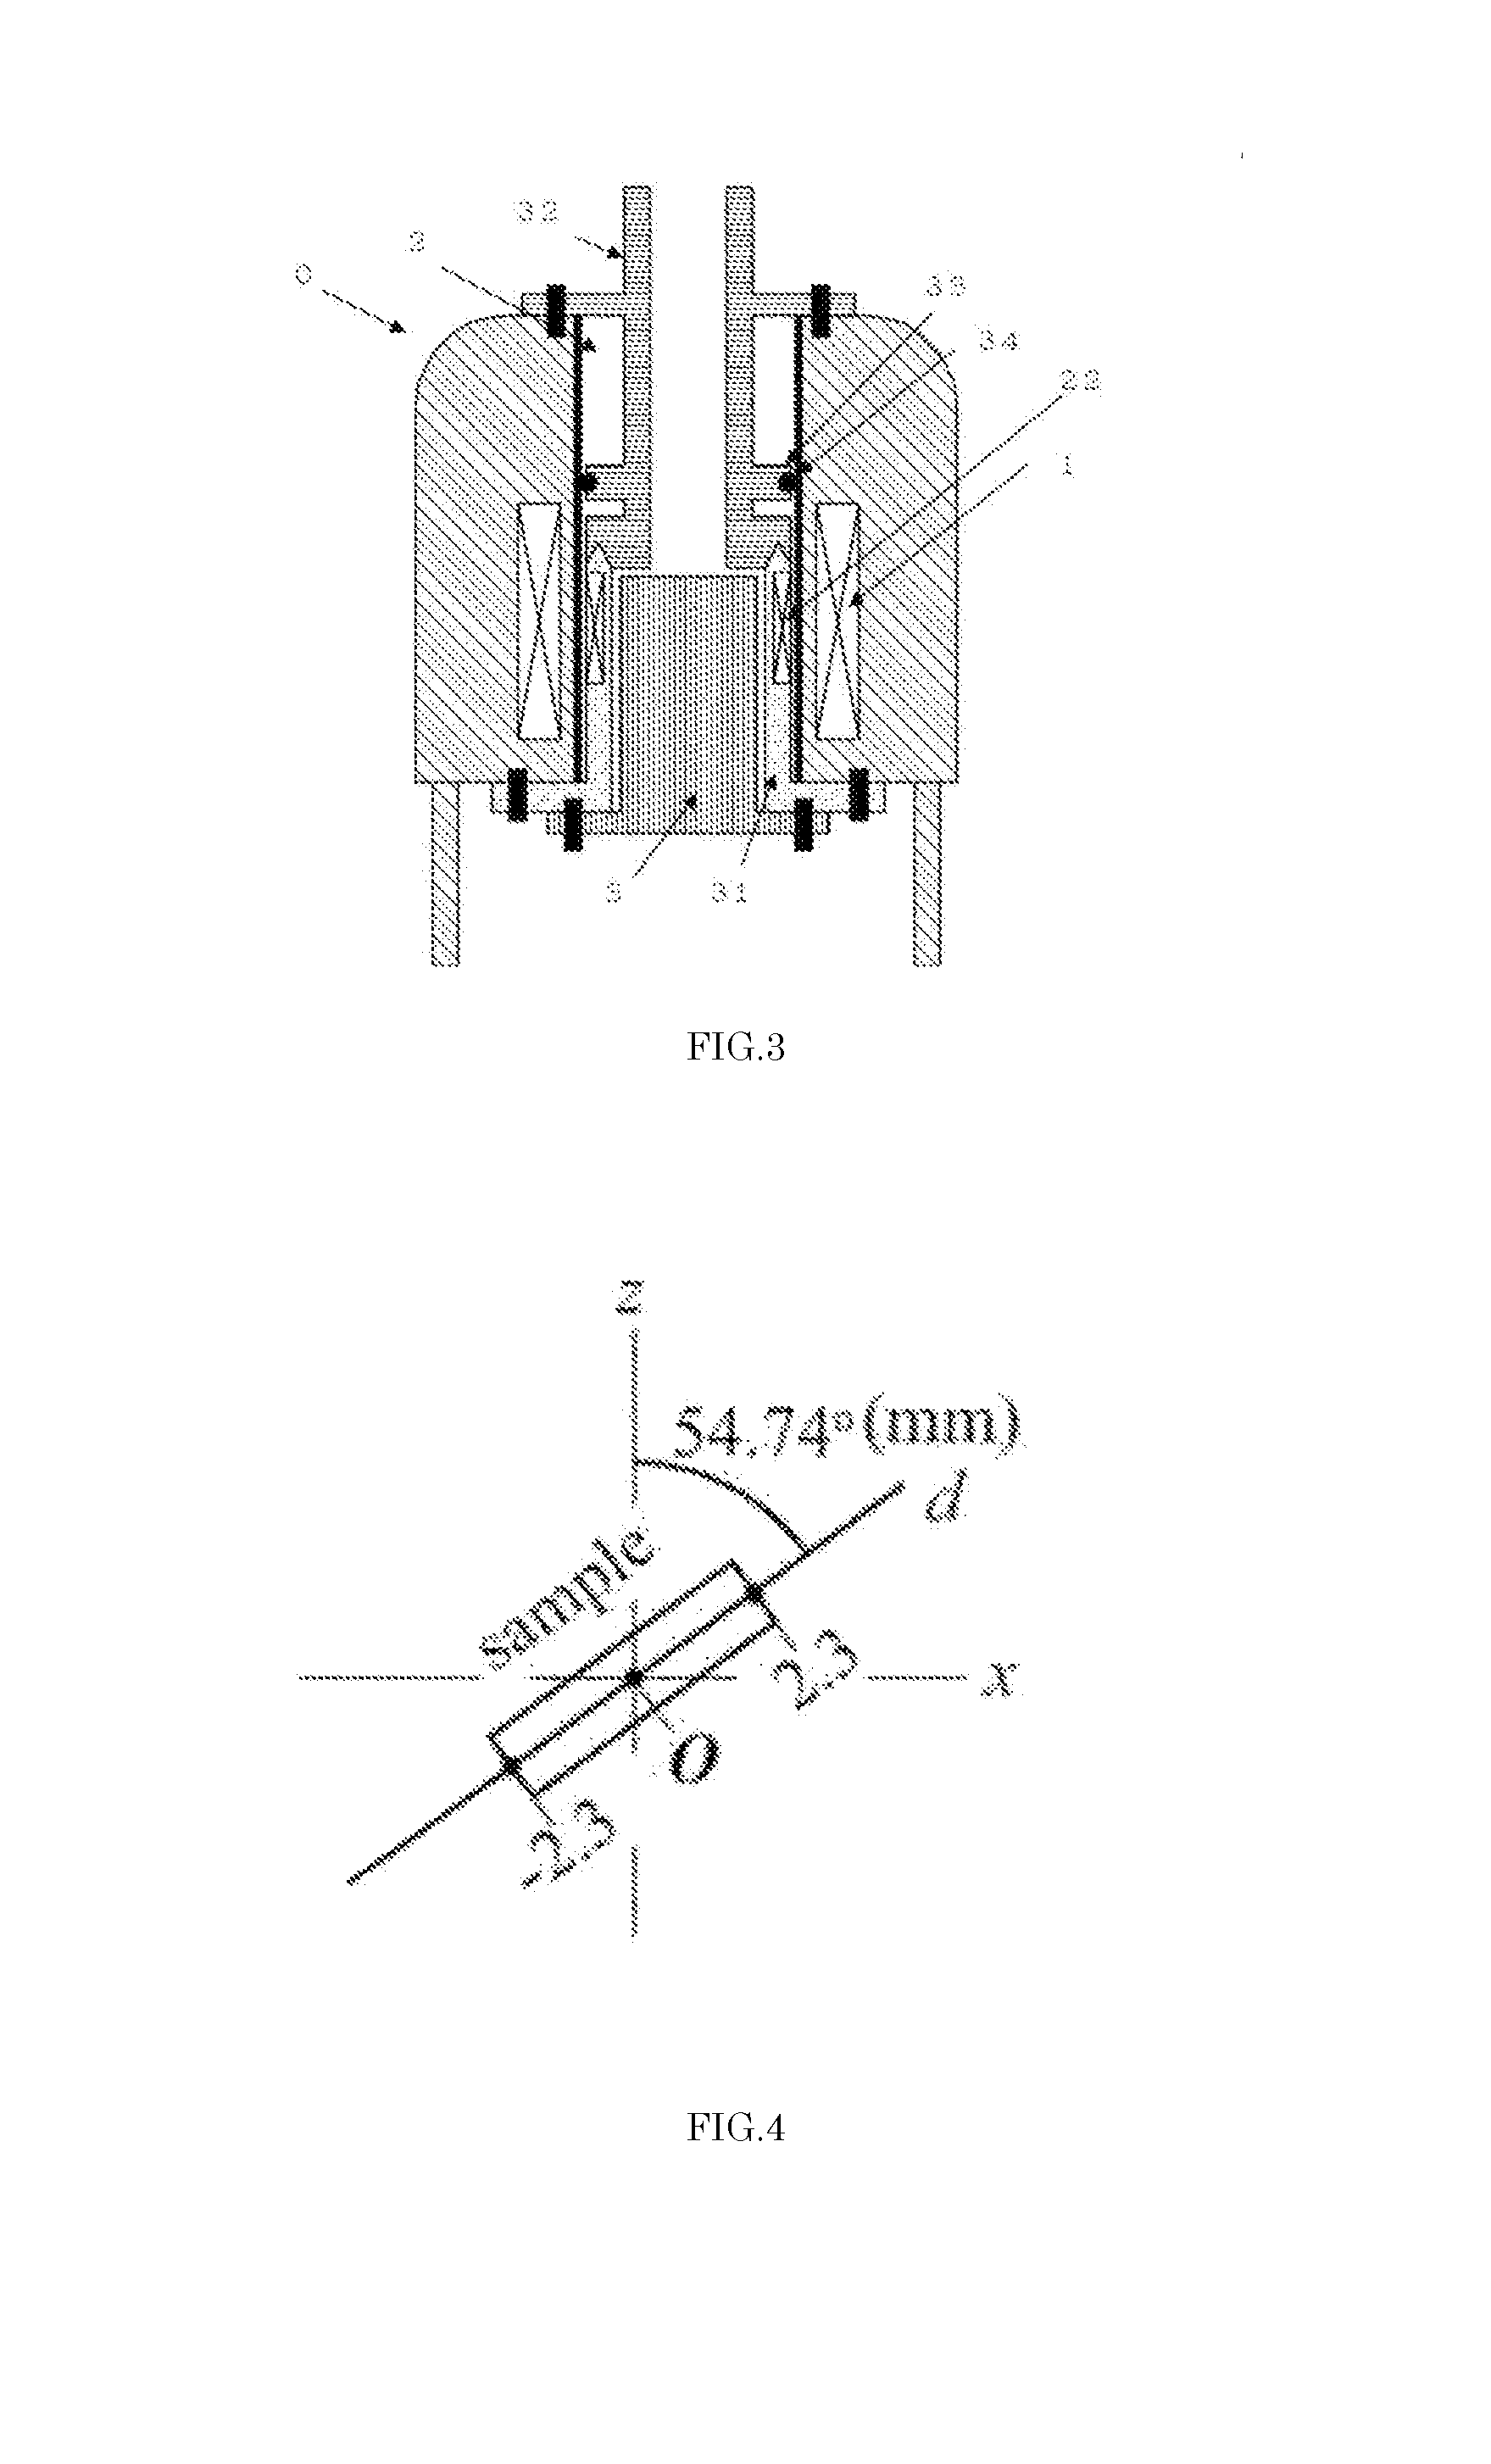 Coil Assembly for Accurate Adjustment of Magic Angle in Solid-State NMR Apparatus and Method of Adjusting Magic Angle Using Such Coil Assembly